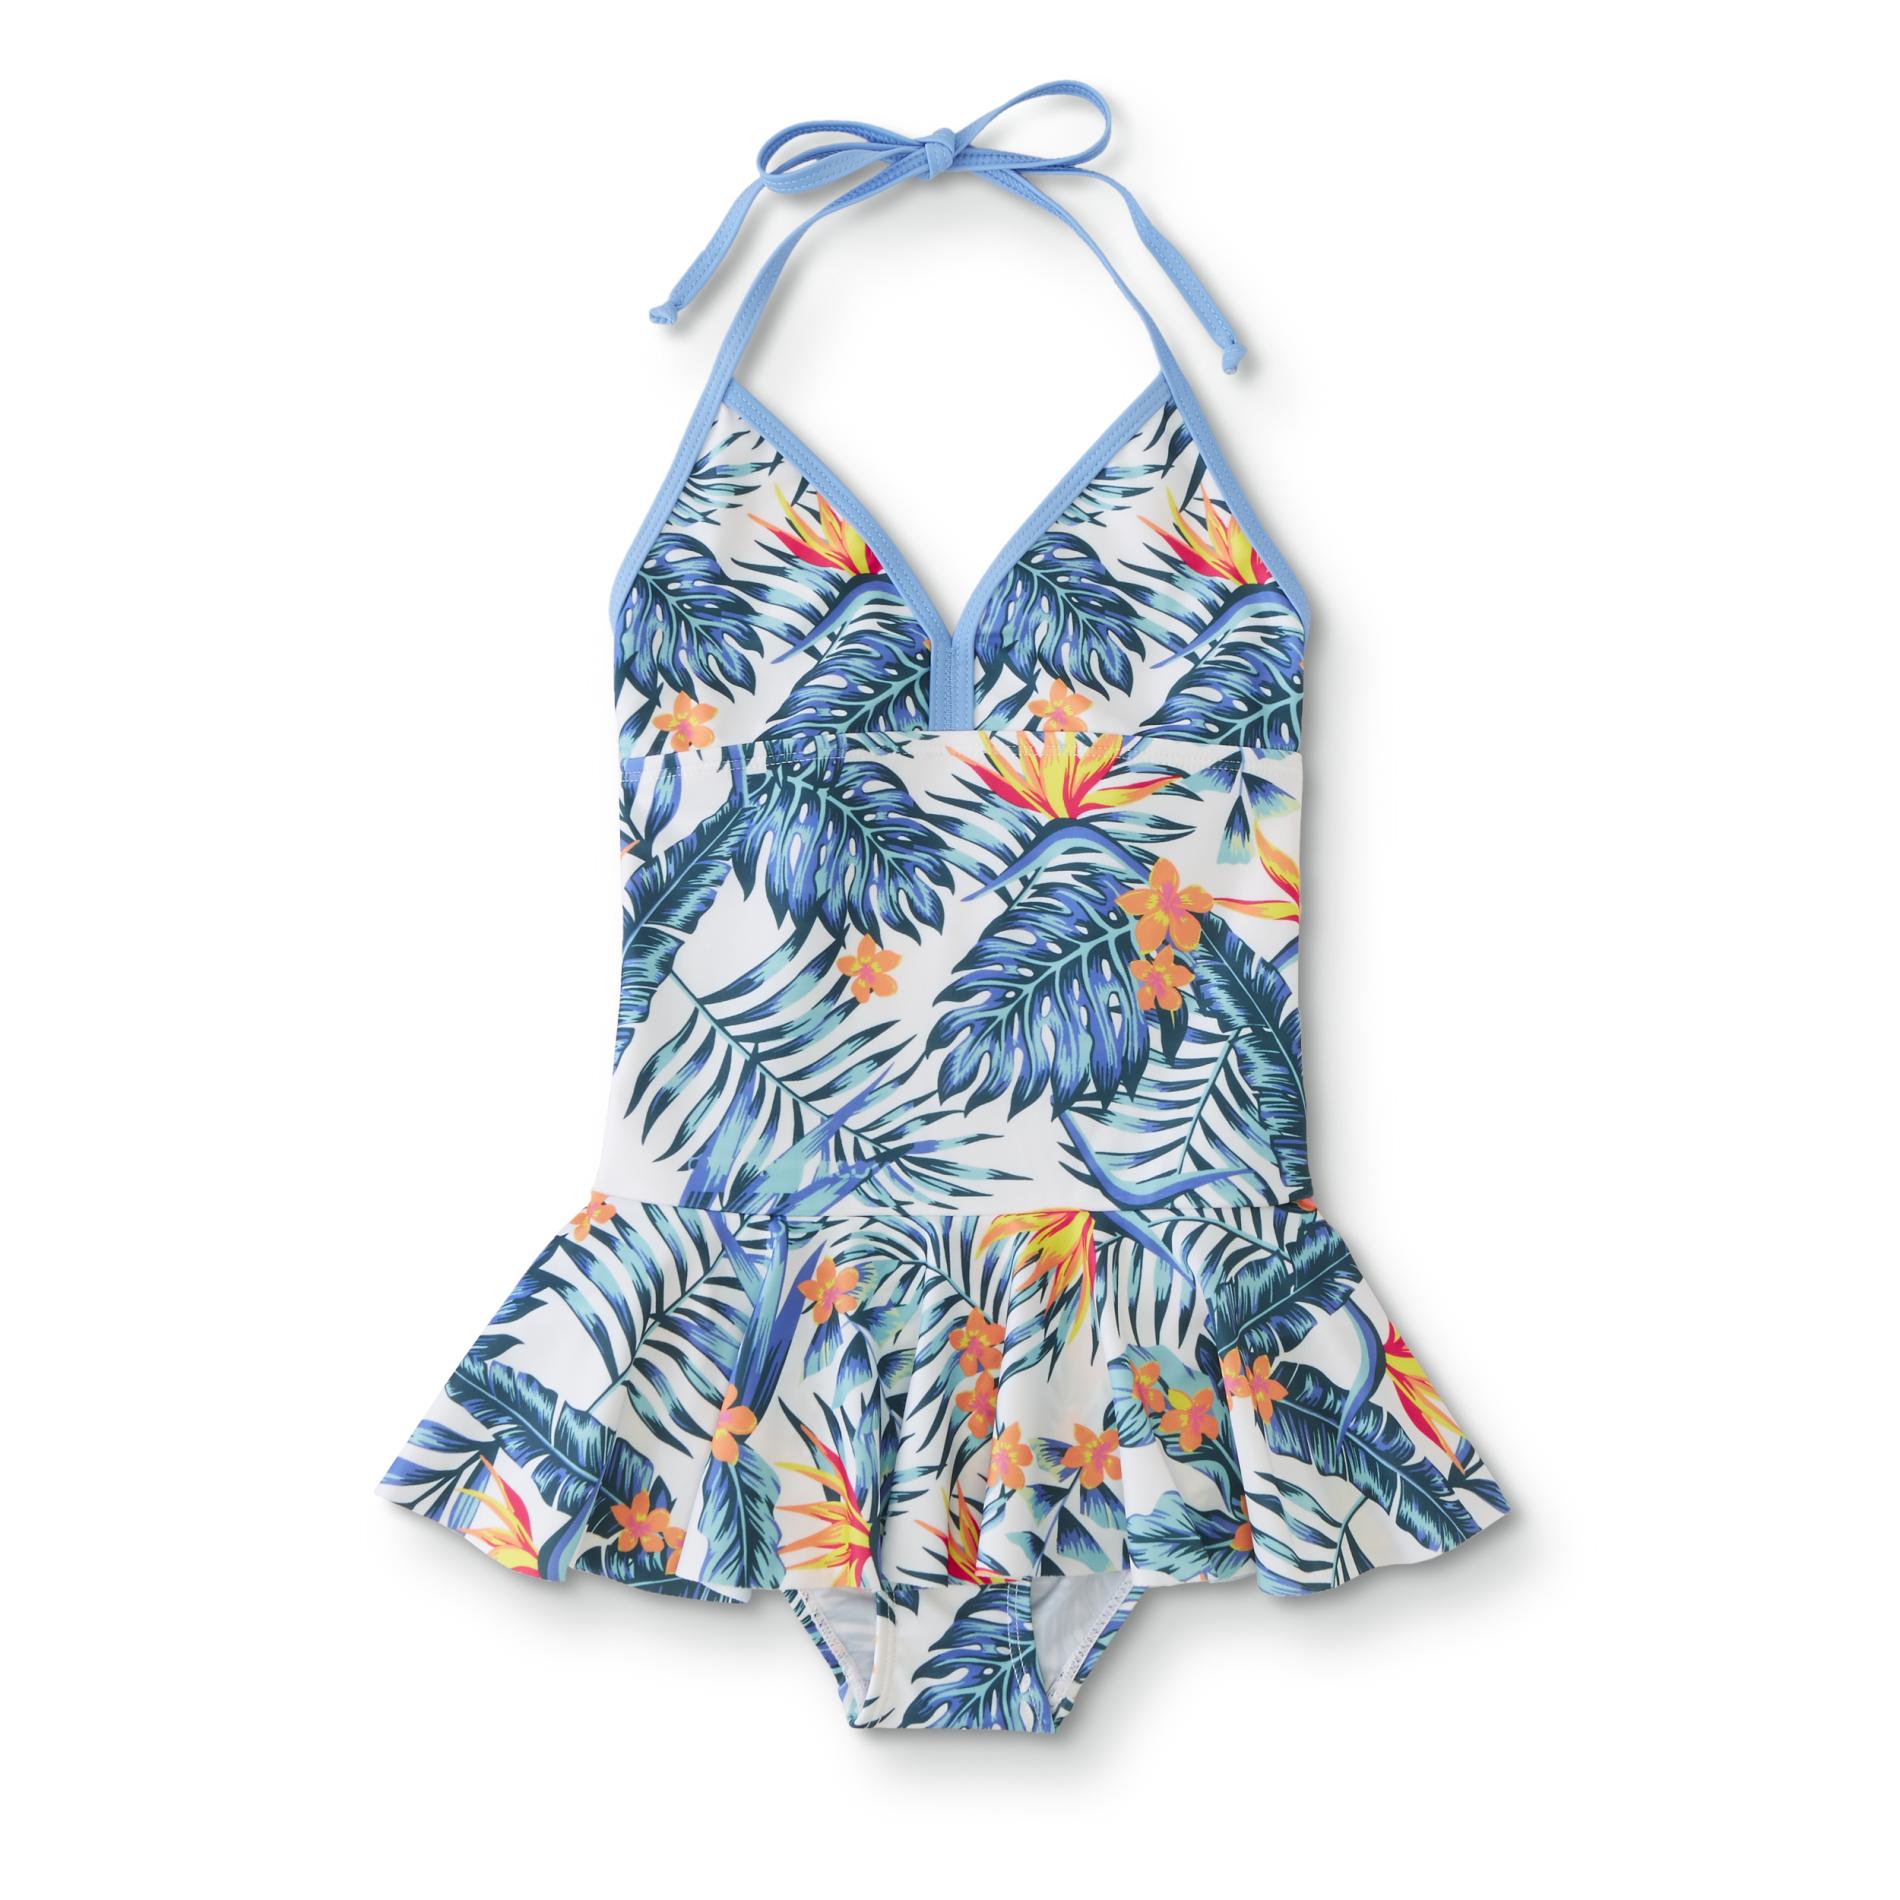 Basic Editions Girls' Skirted Swimsuit - Tropical Floral